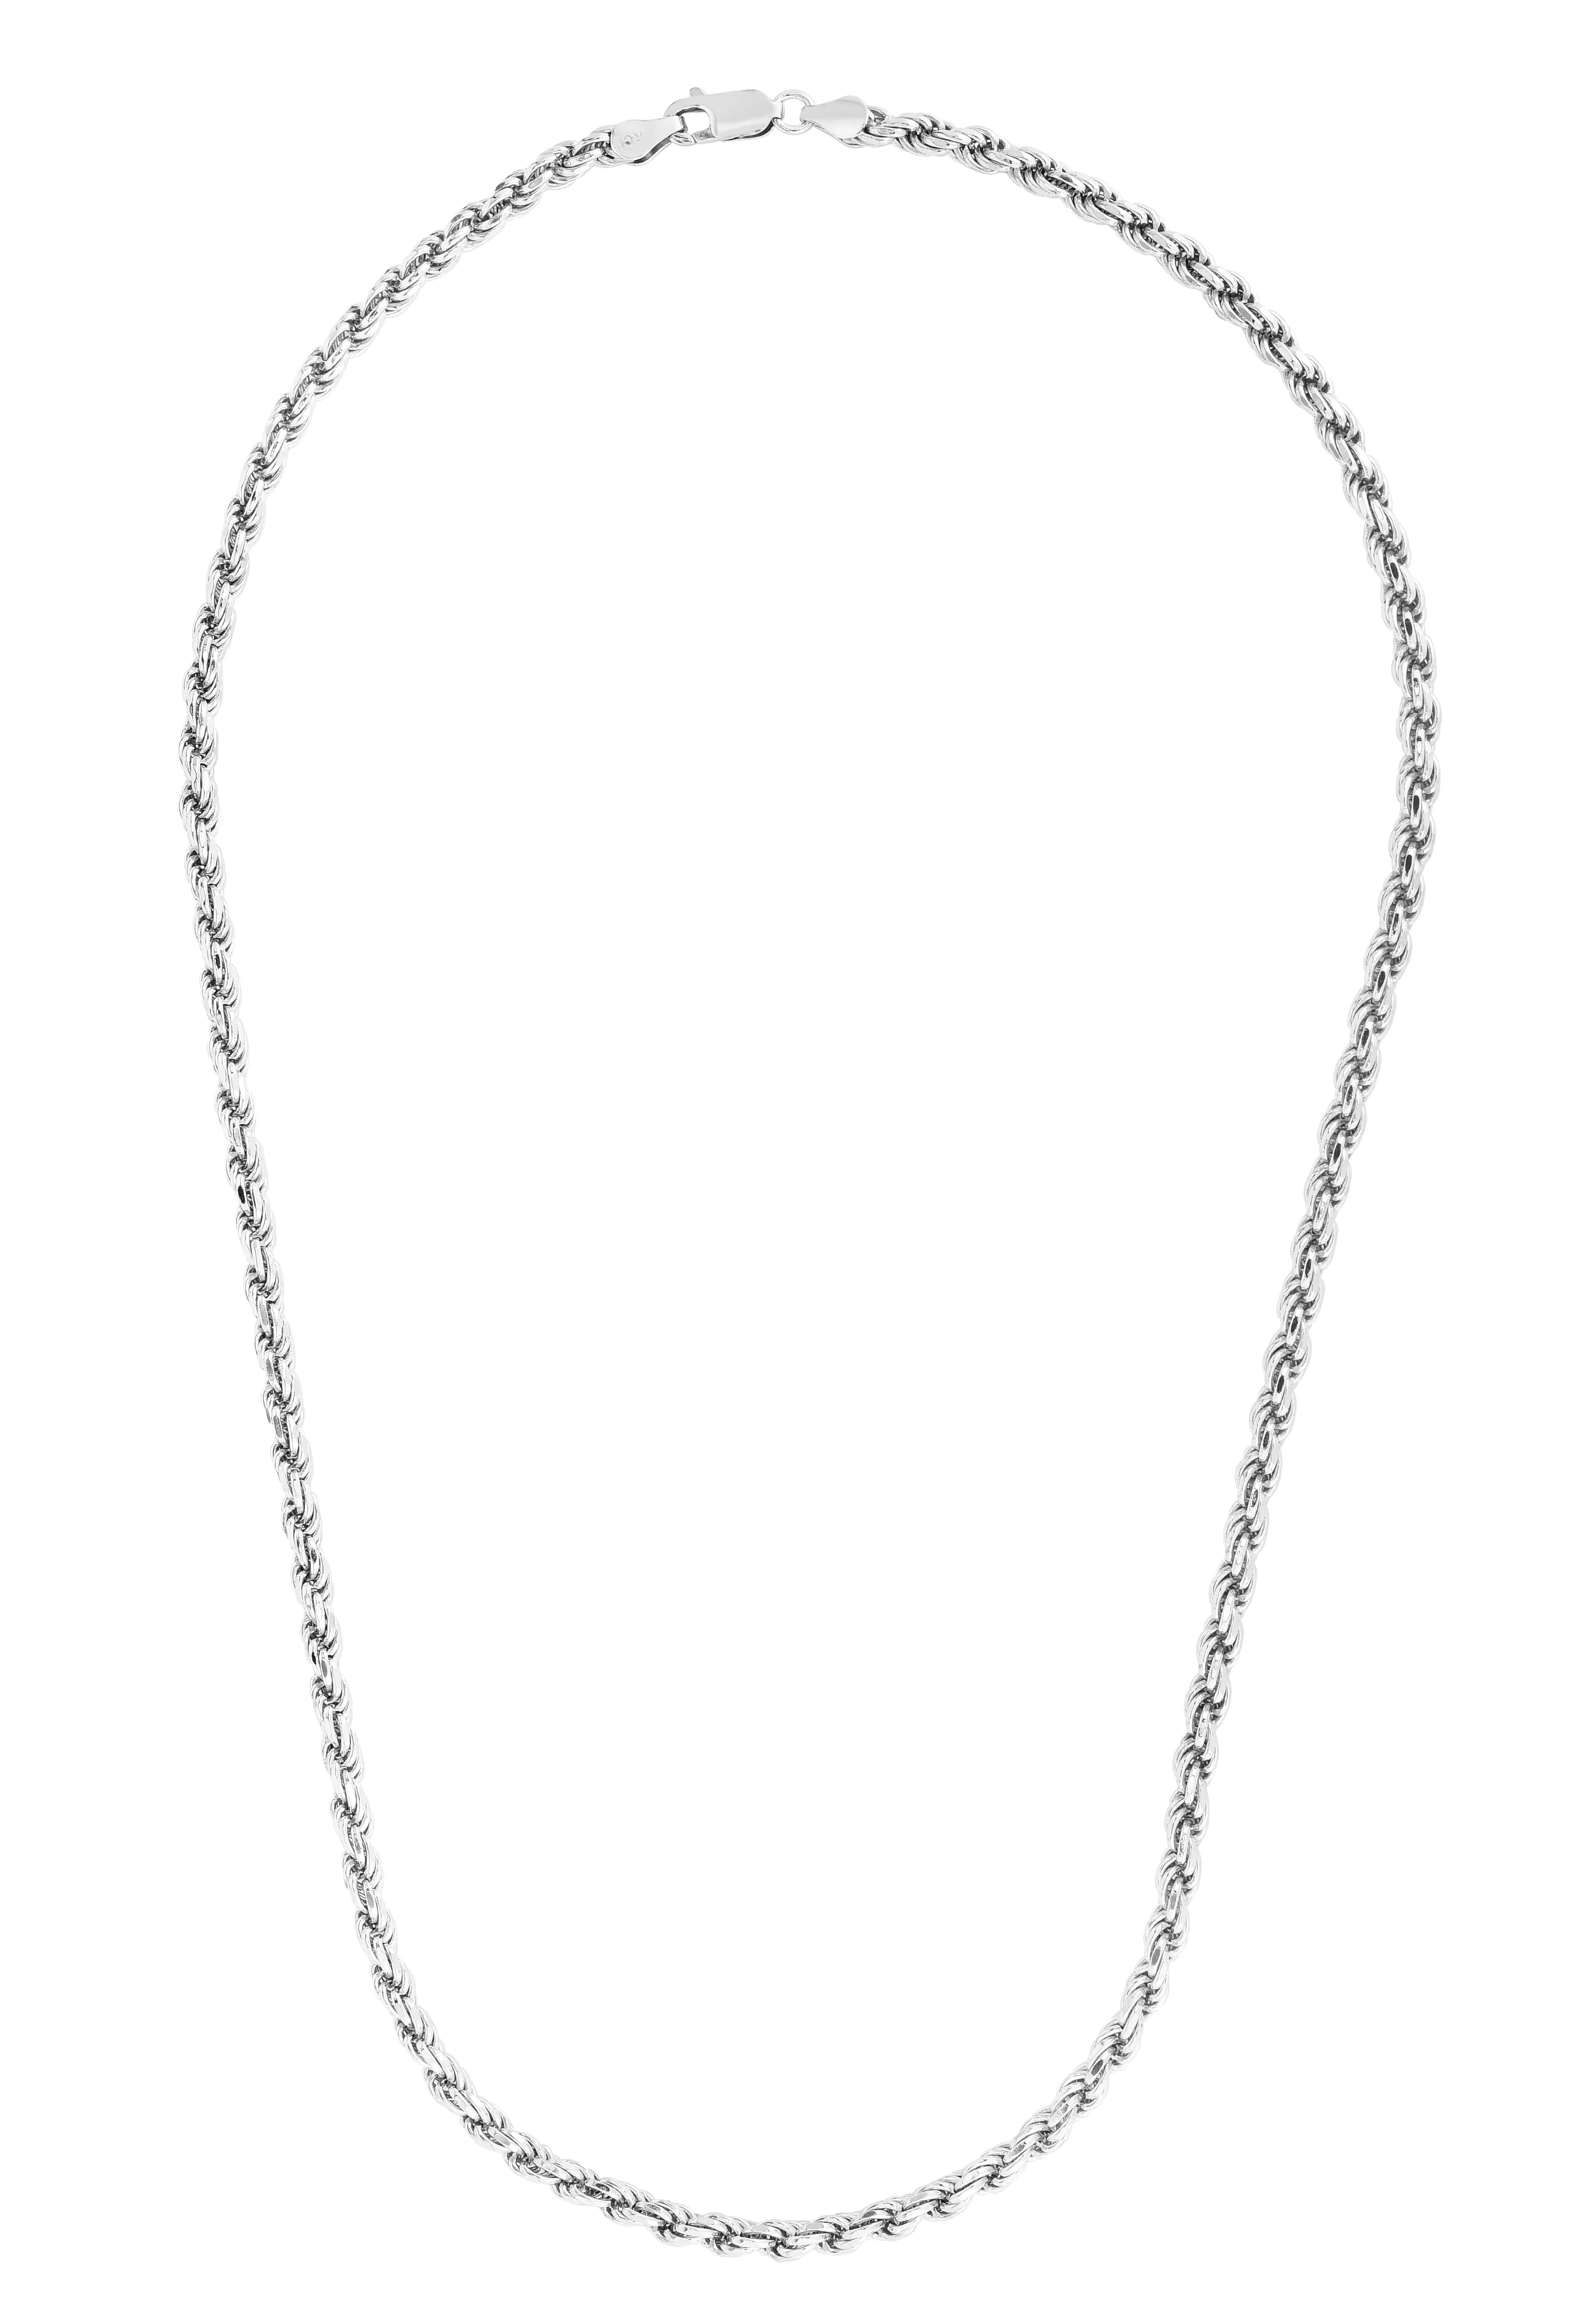 Silver 5mm Rope Chain